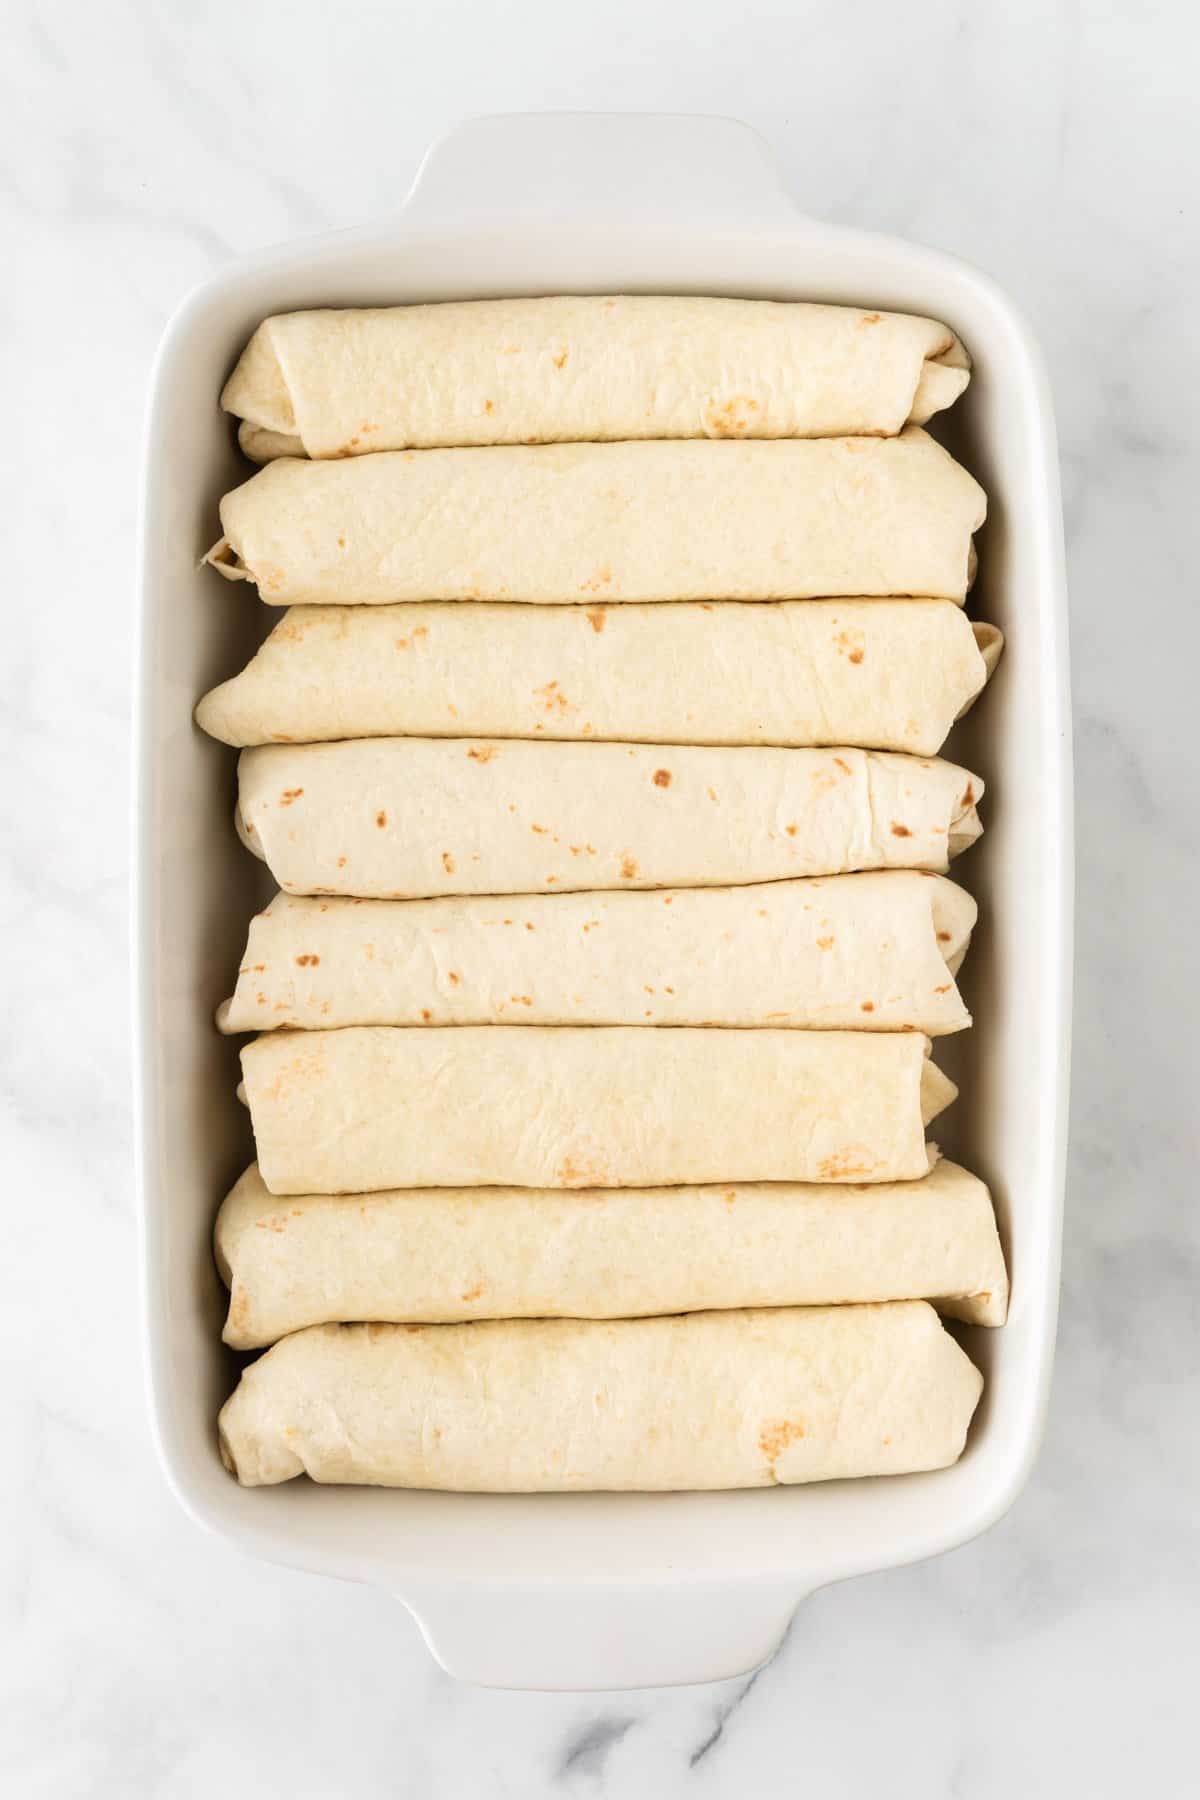 rolled up enchiladas in a baking dish